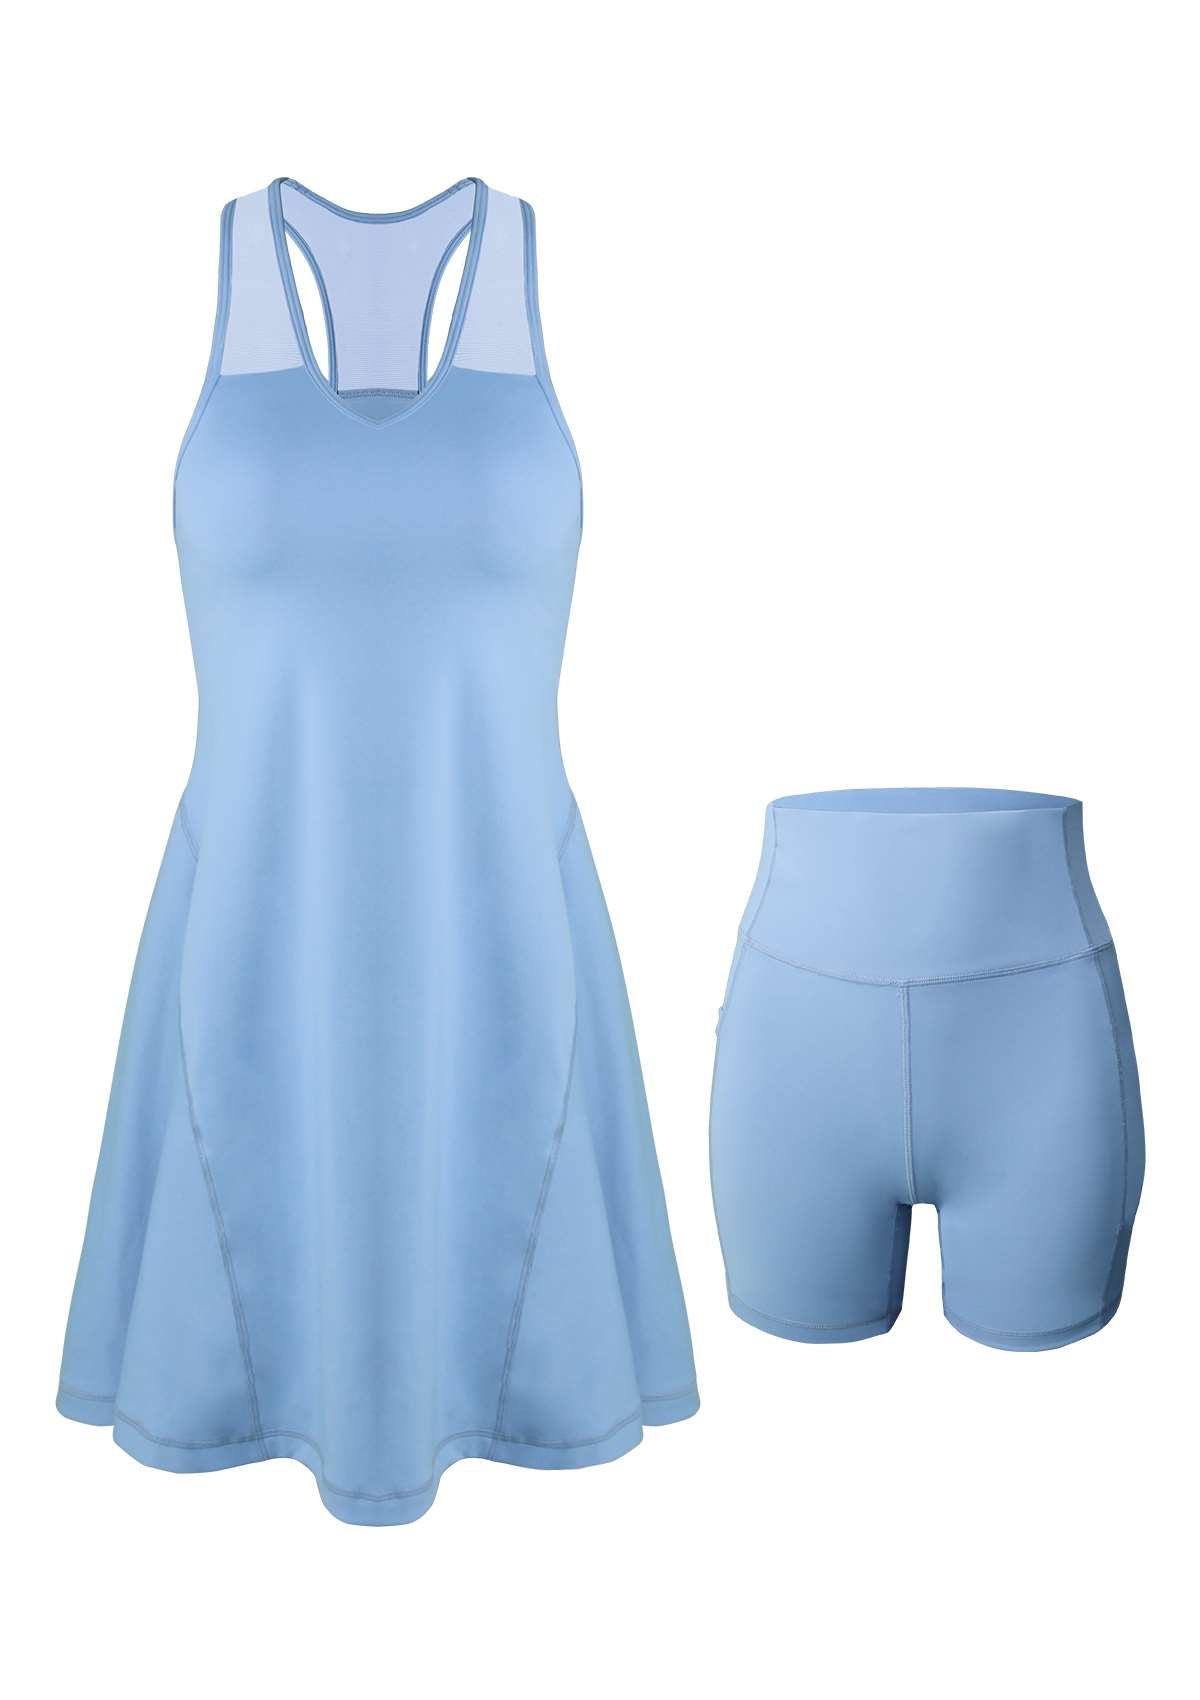 SONGFUL On The Move Sports Dress With Shorts Set - M / Blue